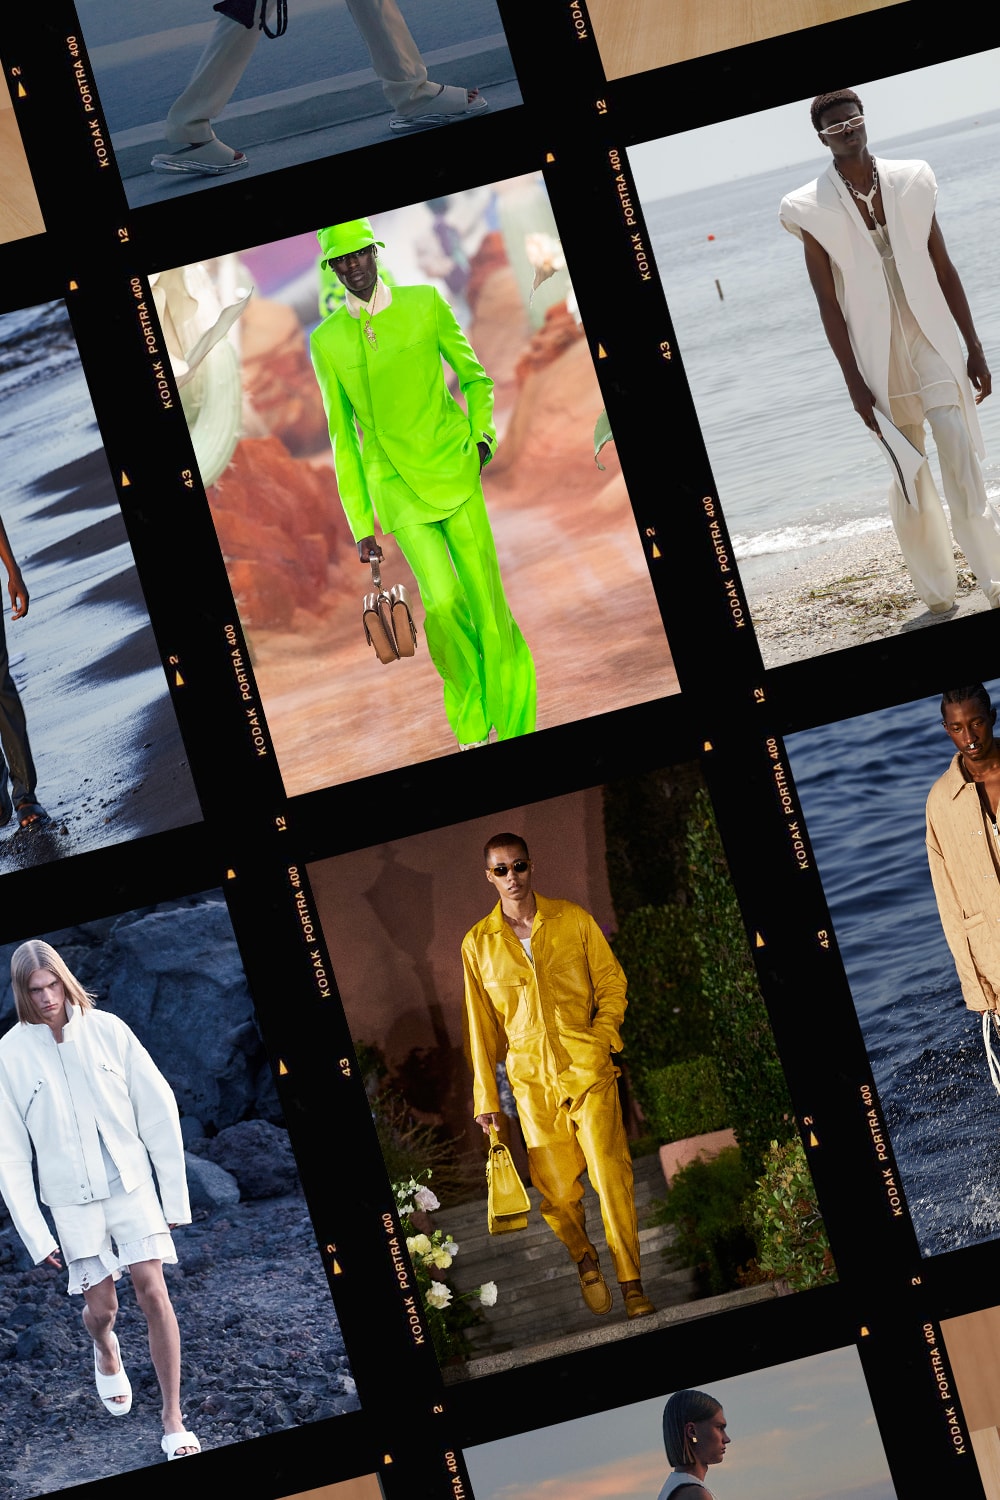 Inventory of 9 major trends in the 2022 Spring/Summer Men's Wear Week: exploring the possibility of joint names, breaking gender boundaries, returning to the western trend...